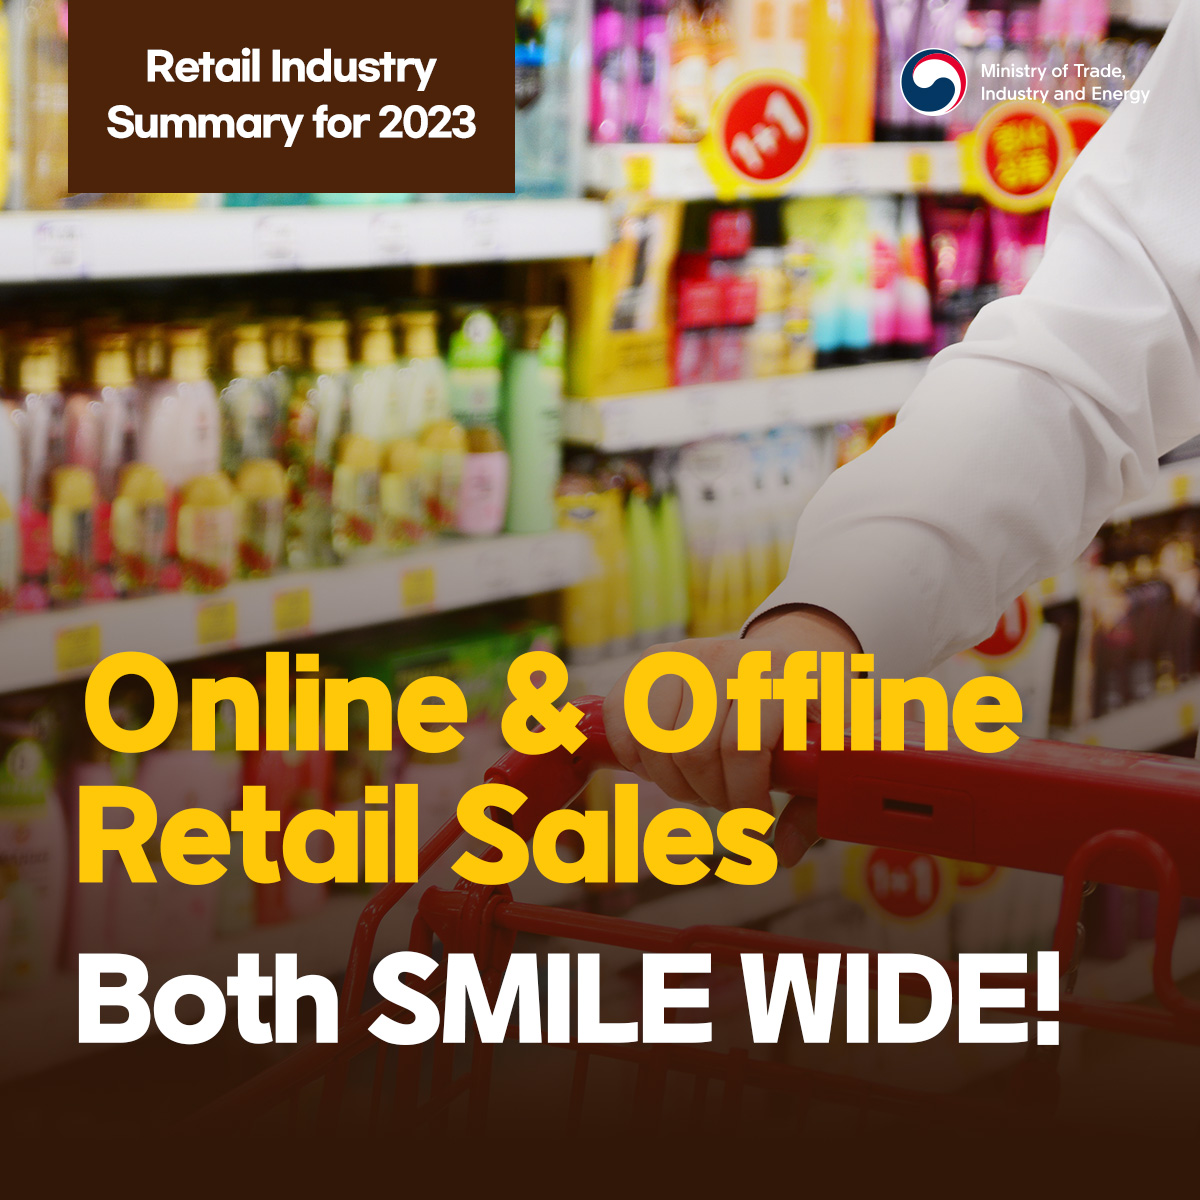 Retail Industry Summary for 2023
Ministry of Trade, Industry and Energy
Online & Offline
Retail Sales
Both SMILE WIDE!